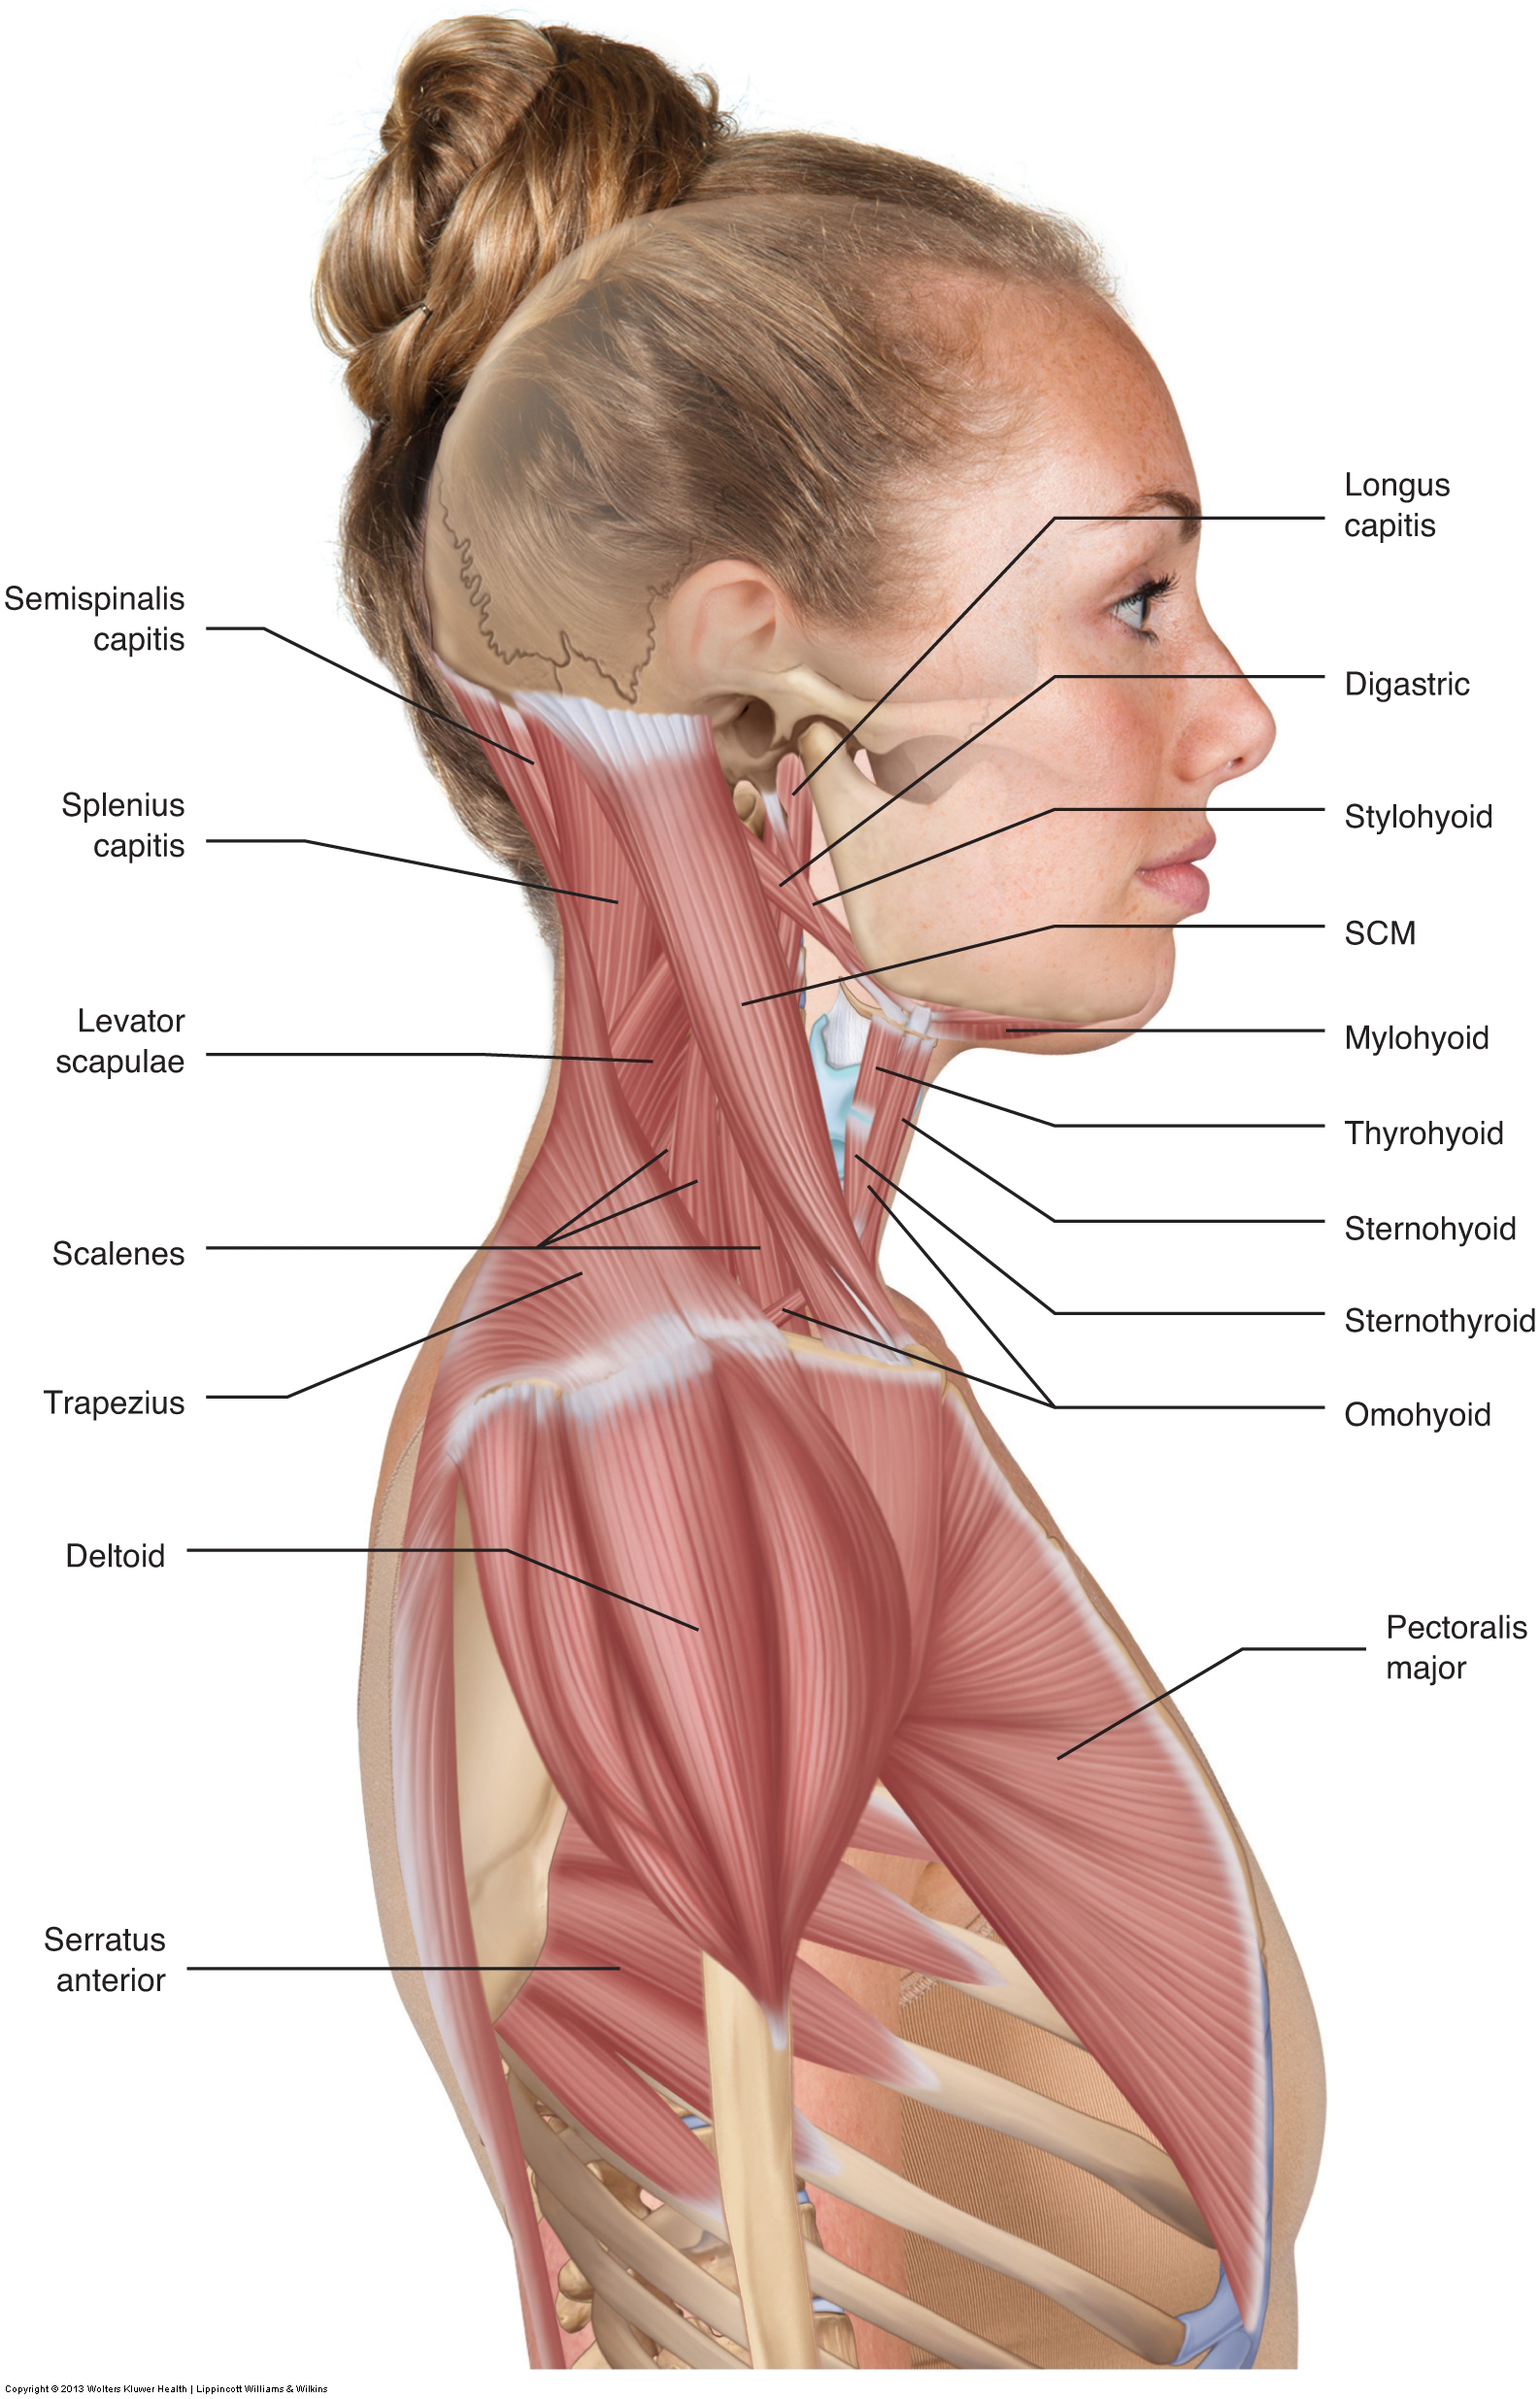 Muscles Of The Neck And Trunk Learn Muscles 9974